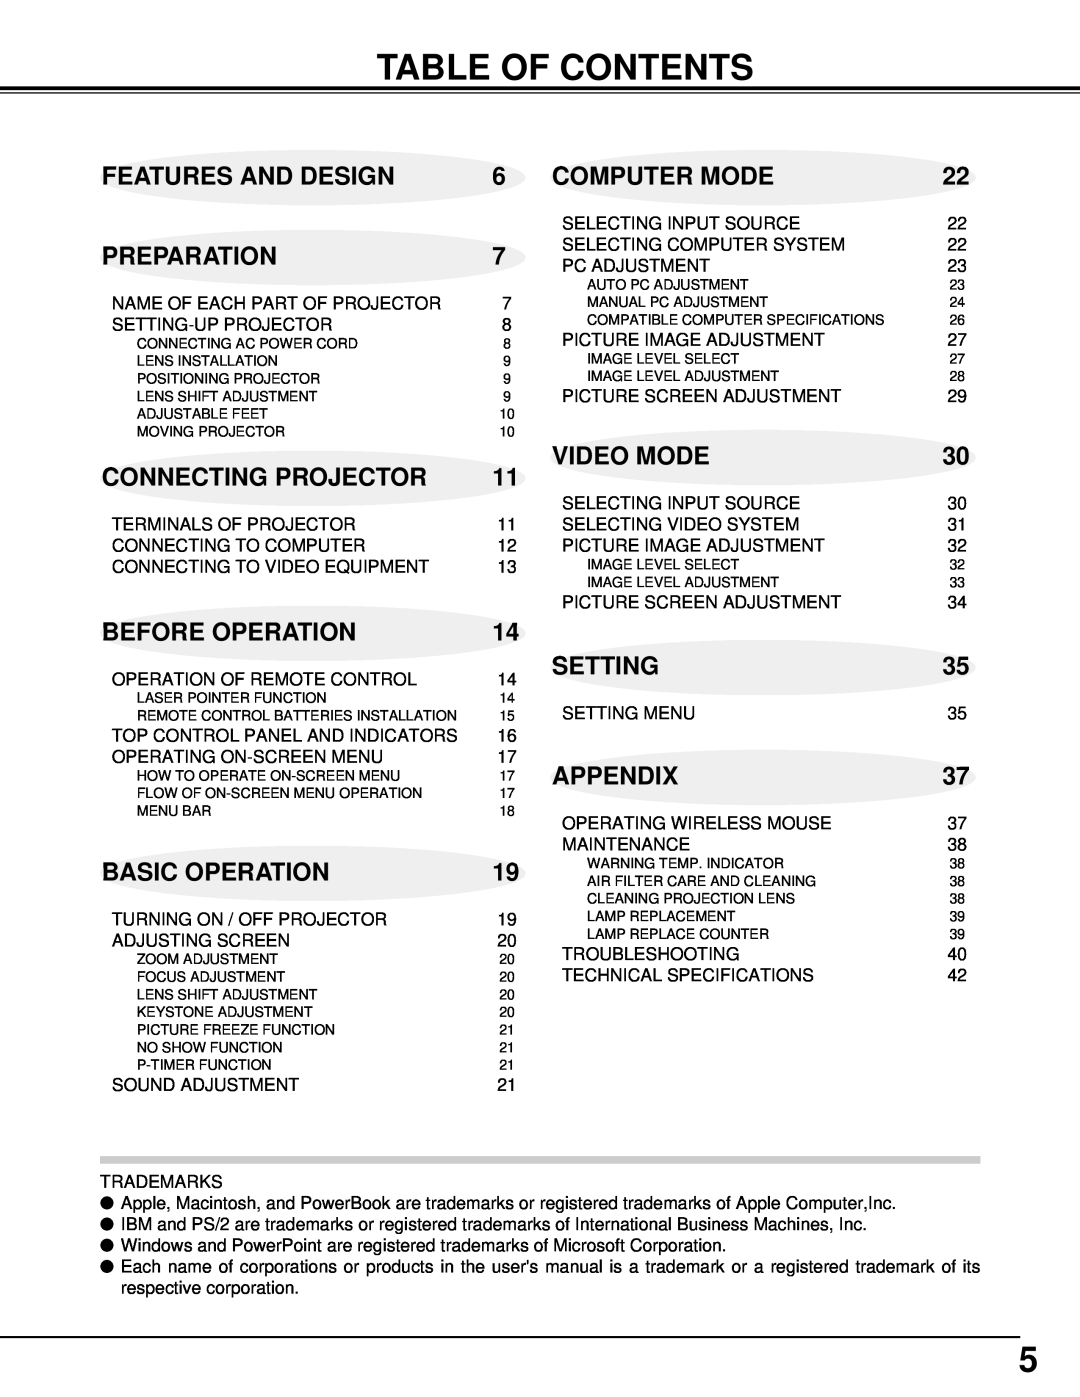 Christie Digital Systems 38-VIV205-01 Table Of Contents, Features And Design, Preparation, Connecting Projector, Setting 